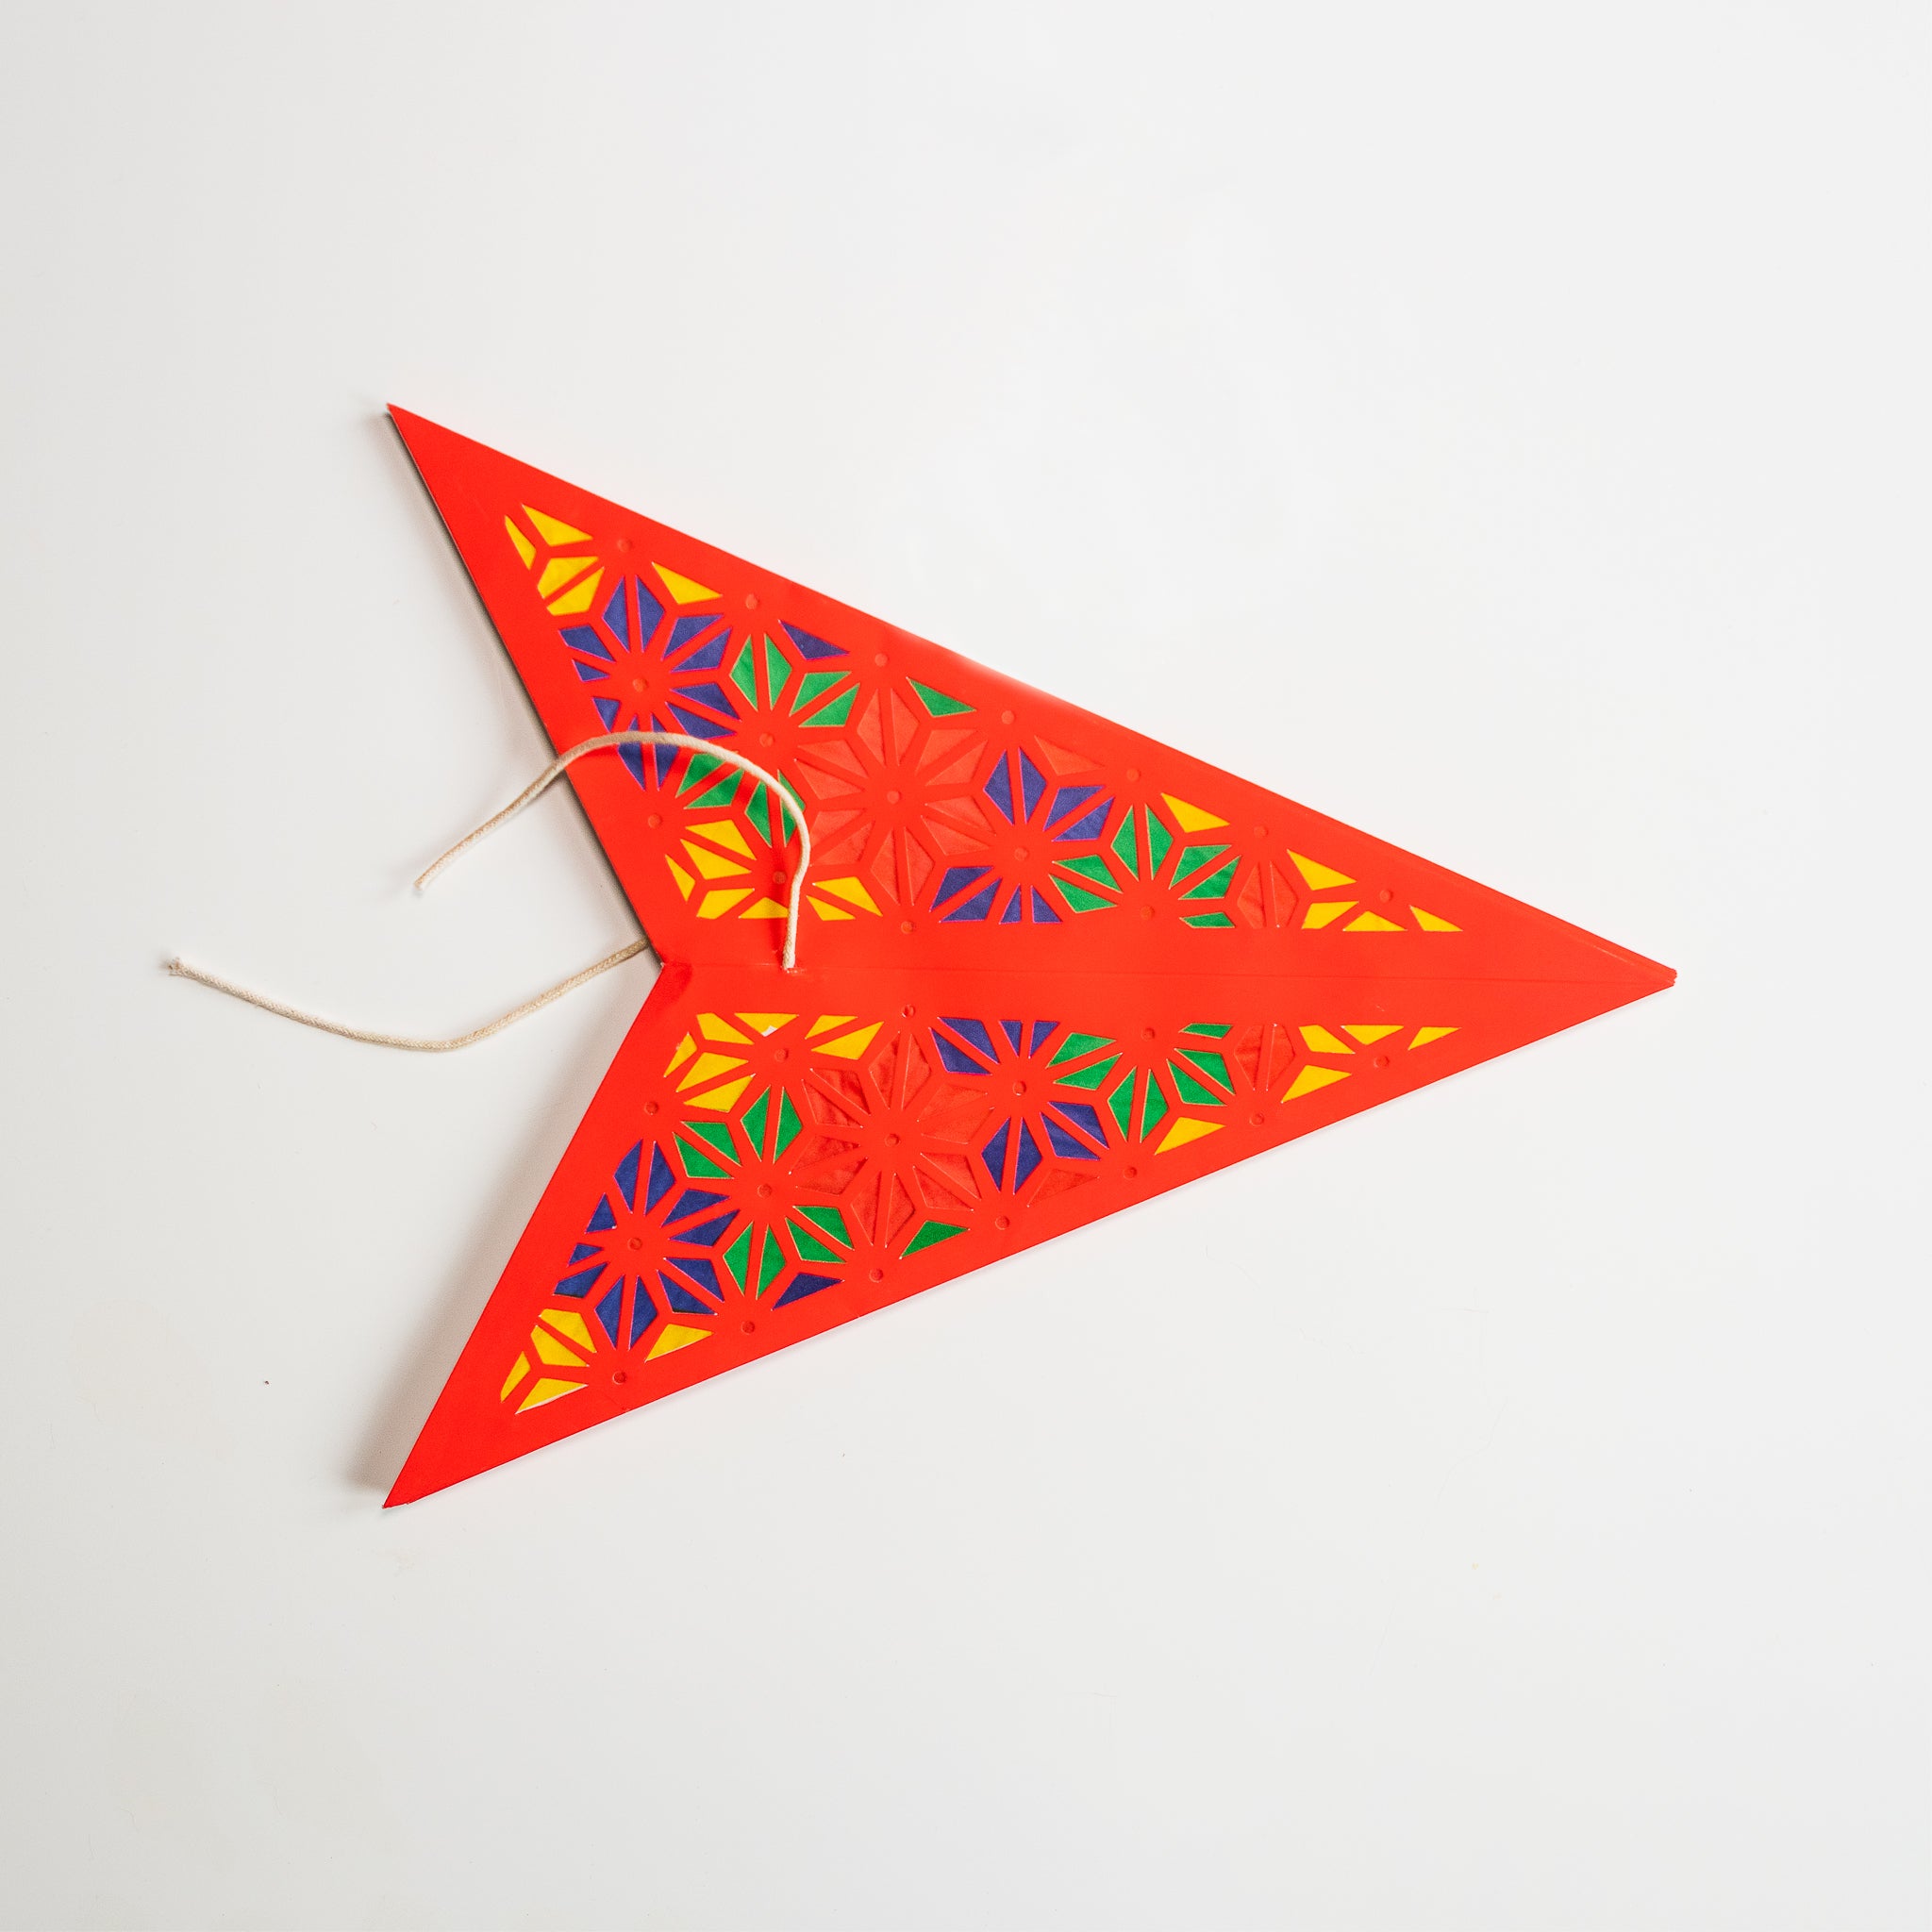  Red and Multi-Coloured Tissue Paper Star Lantern